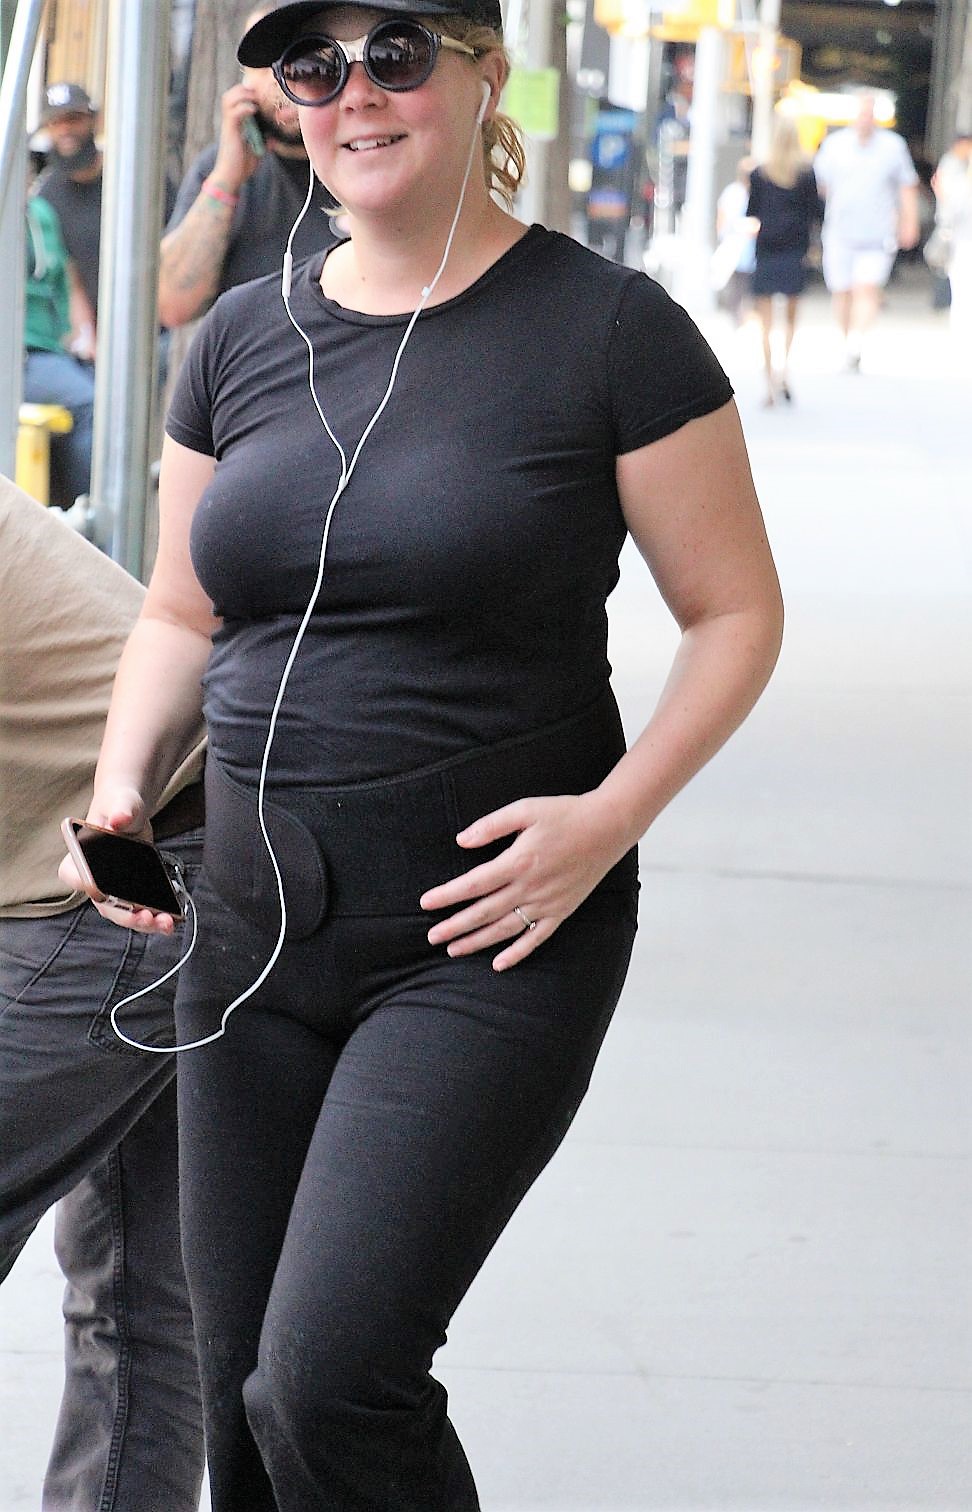 Amy Schumers C Section Scar Actress Proudly Shows It Off In Nyc 